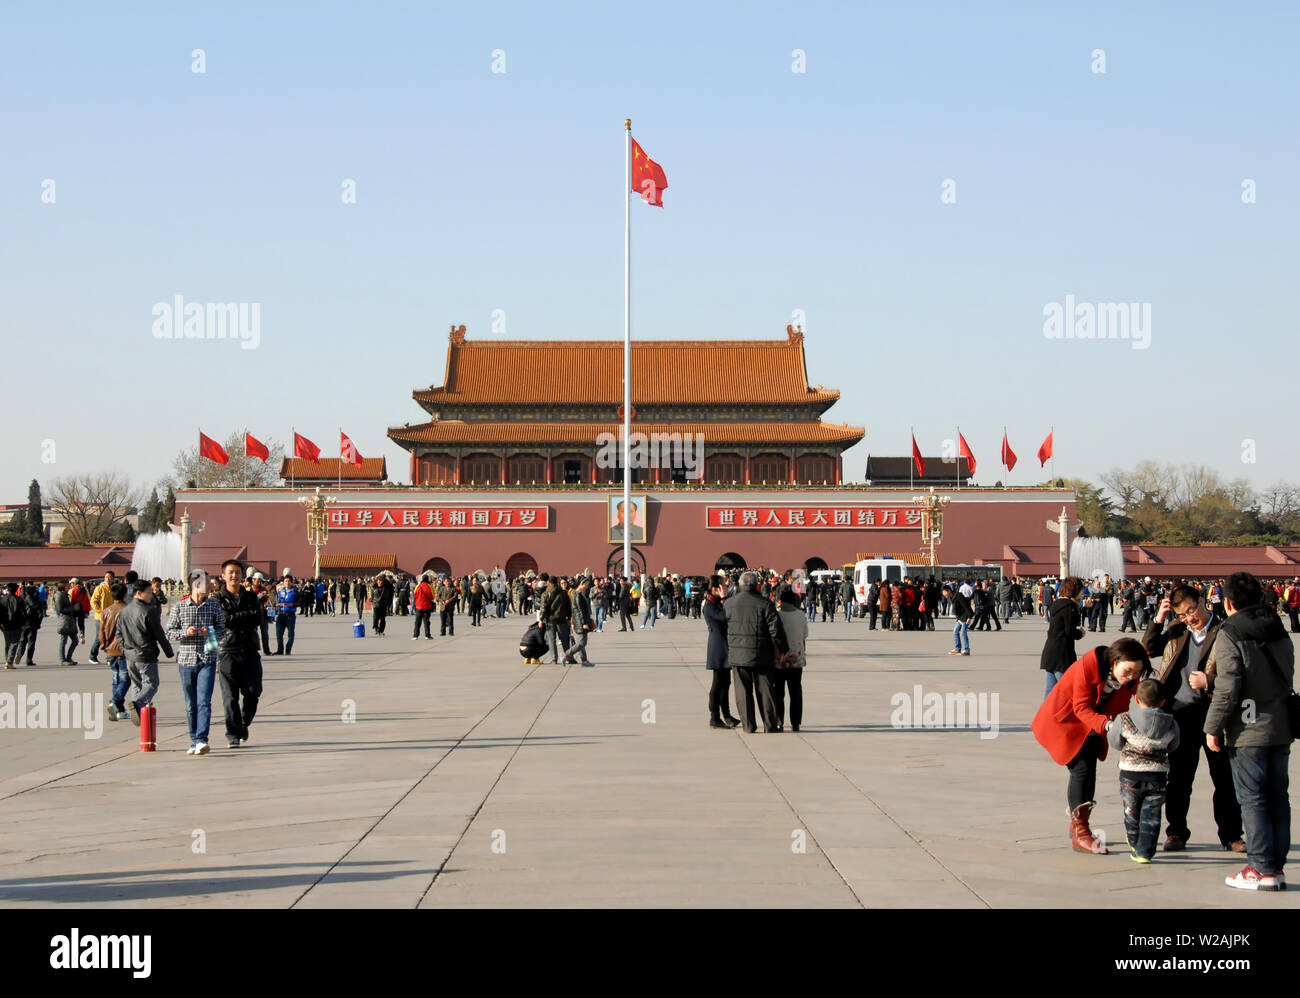 Tiananmen Square, Beijing, China and the Gate of Heavenly Peace (Tian An Men). Tiananmen Square is a famous landmark in Beijing by the Forbidden City Stock Photo